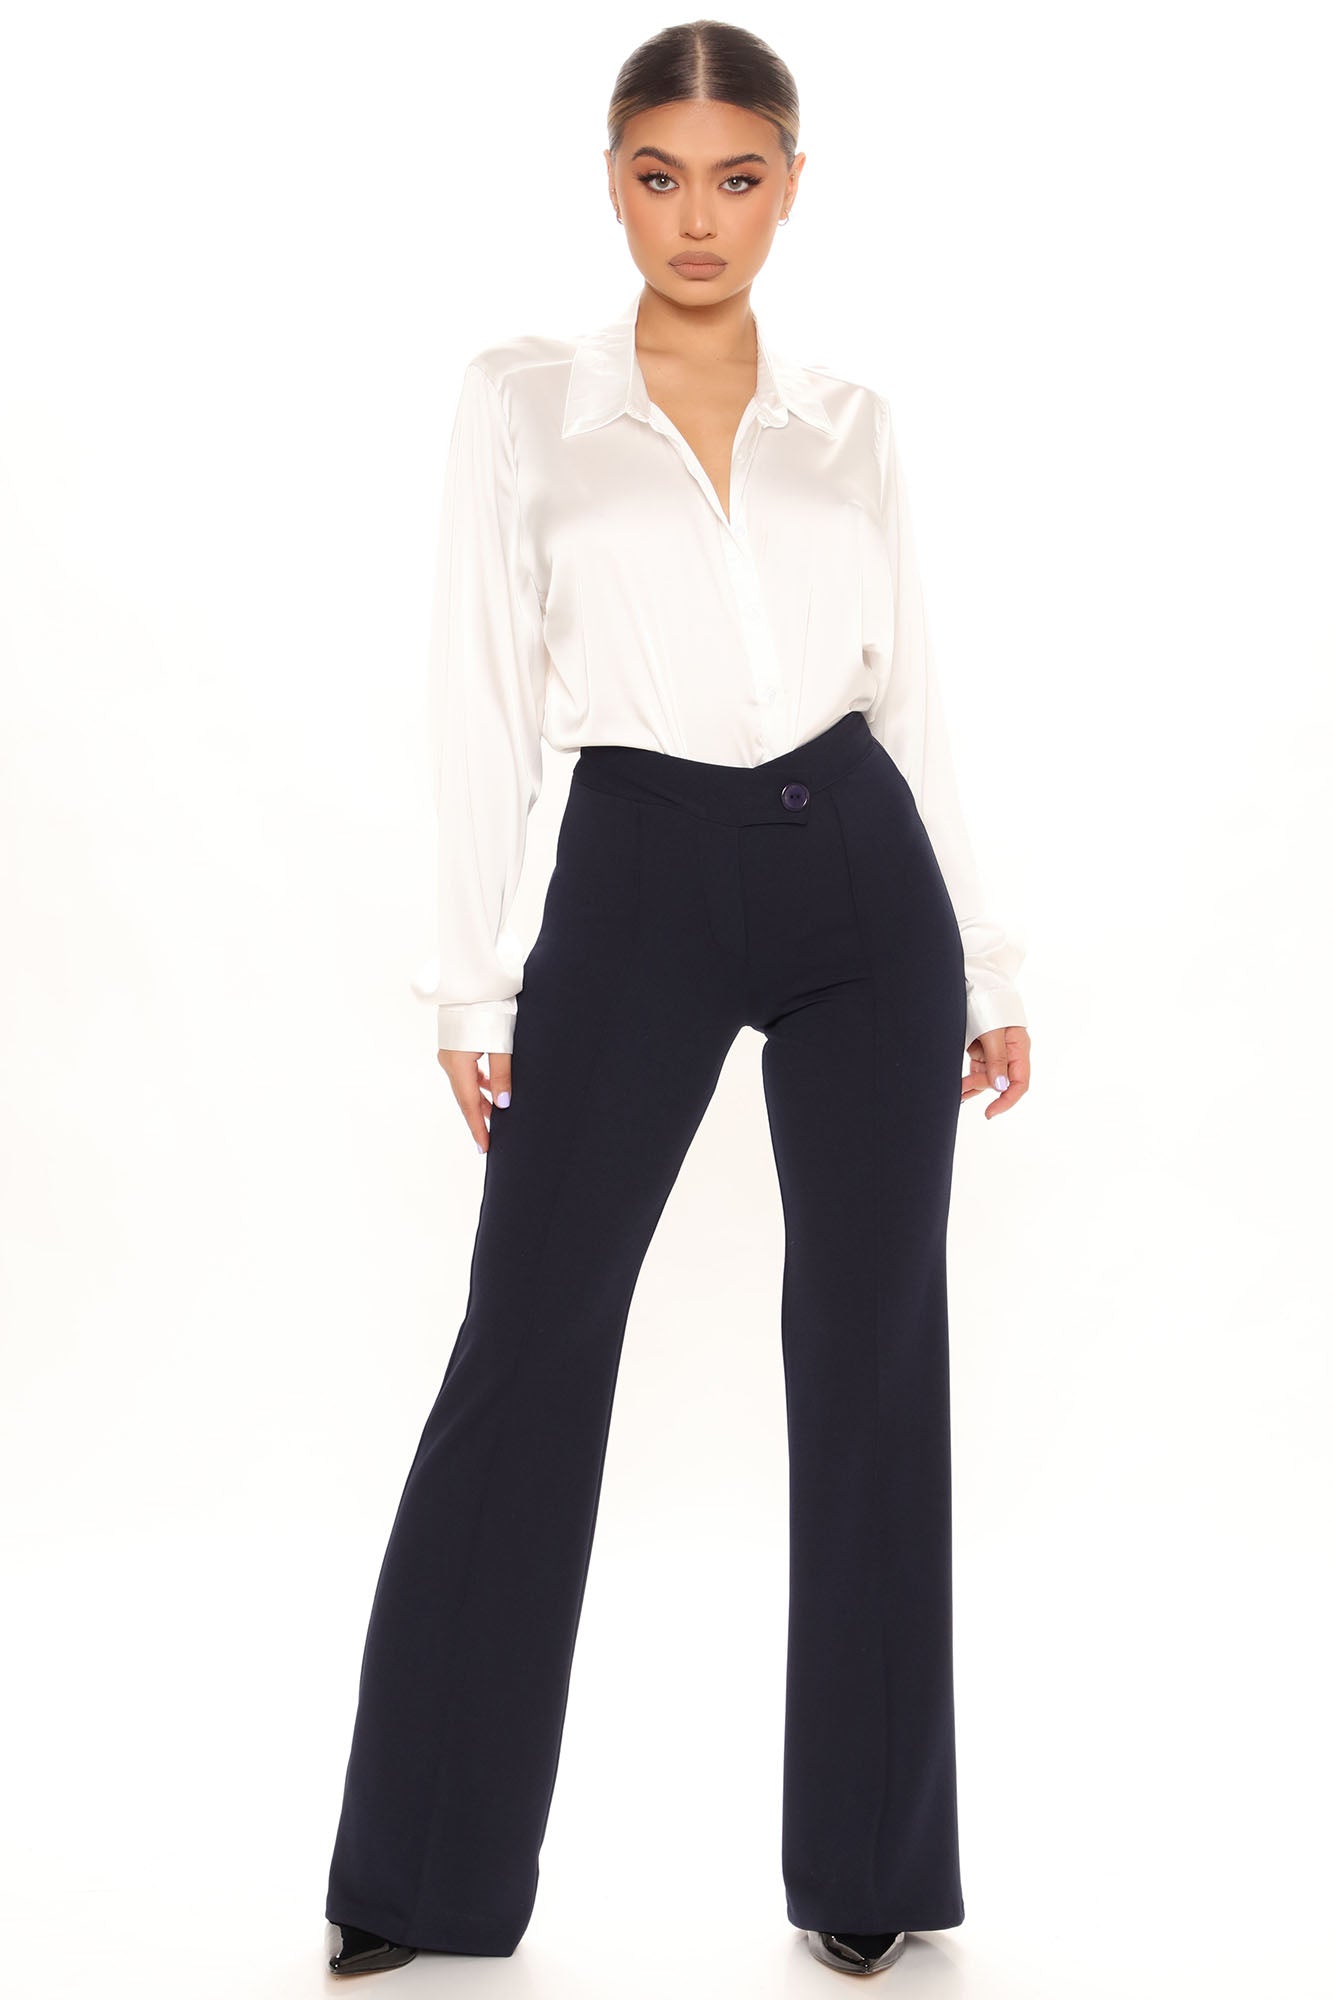 KaLI_store Work Pants for Women Women's Casual High Waisted Wide Leg Pants  Button Down Straight Long Trousers Elegant Pants Office Work Navy,XXL